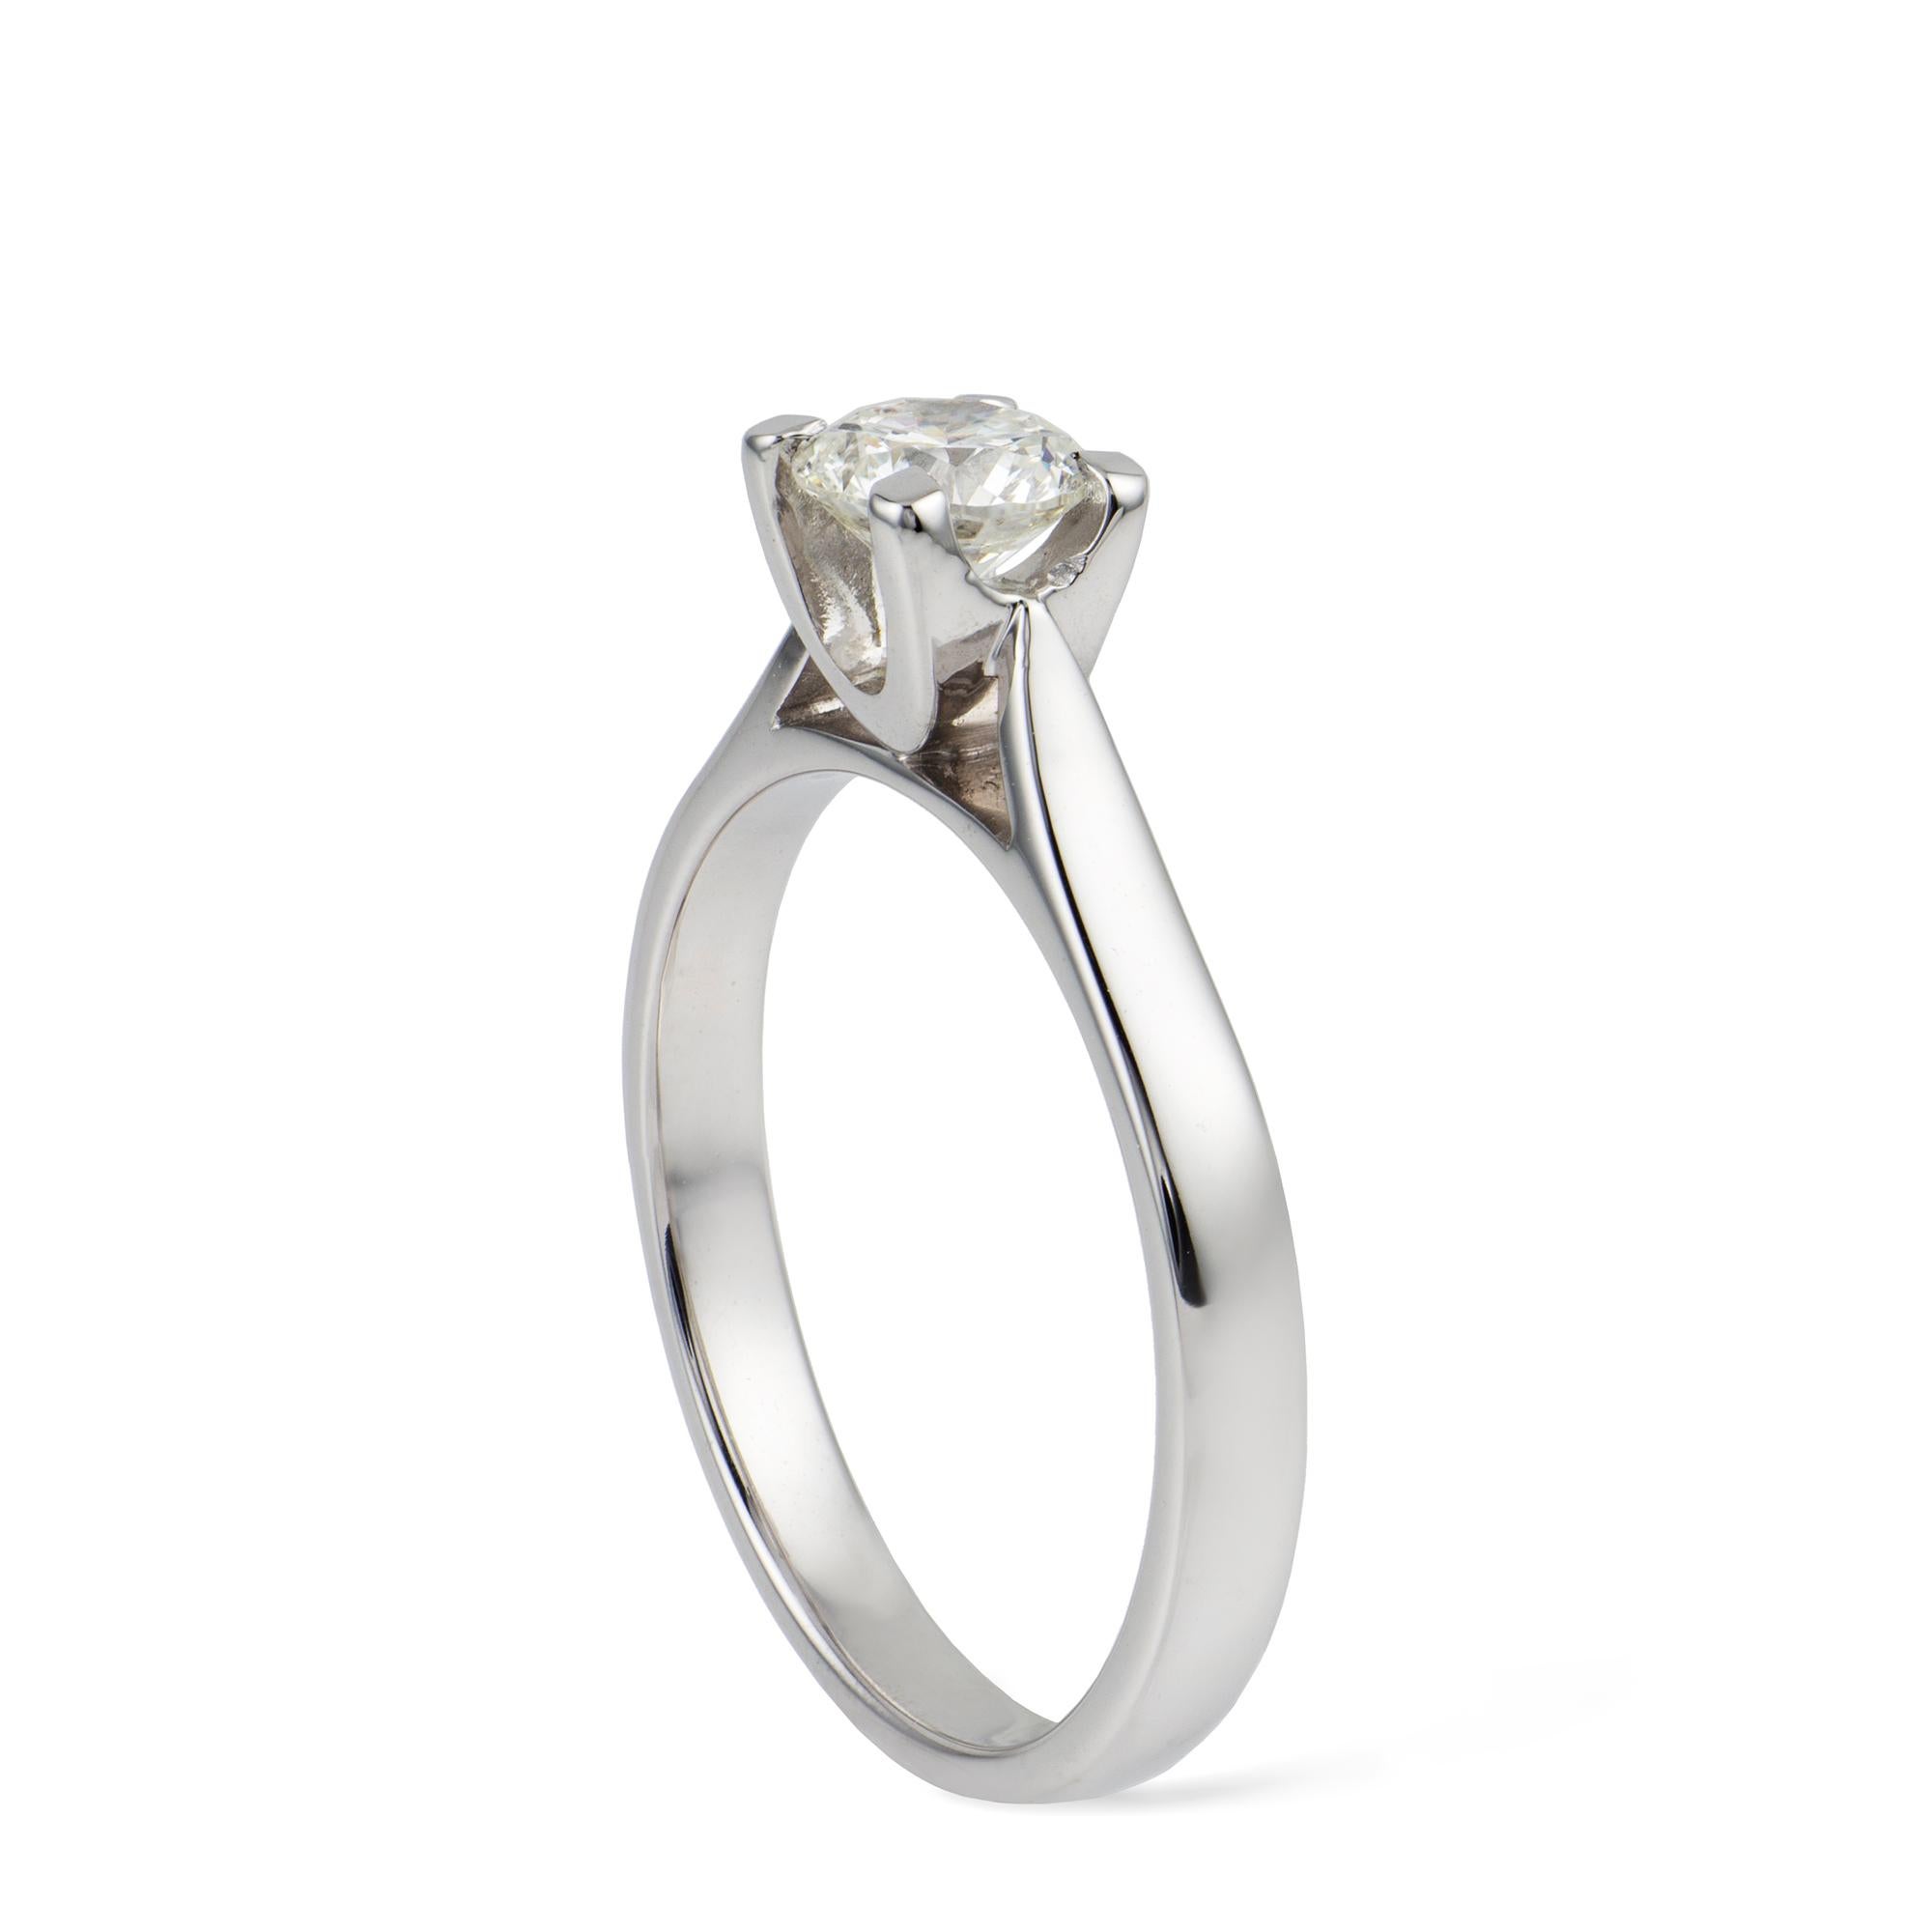 A single stone diamond ring, the round brilliant-cut diamond weighing 0.52 carats, assessed as H colour SI clarity, four claw-set to a U-shaped collet to a flat shank, all mounted in white gold, hallmarked 18ct London bearing the Bentley & Skinner